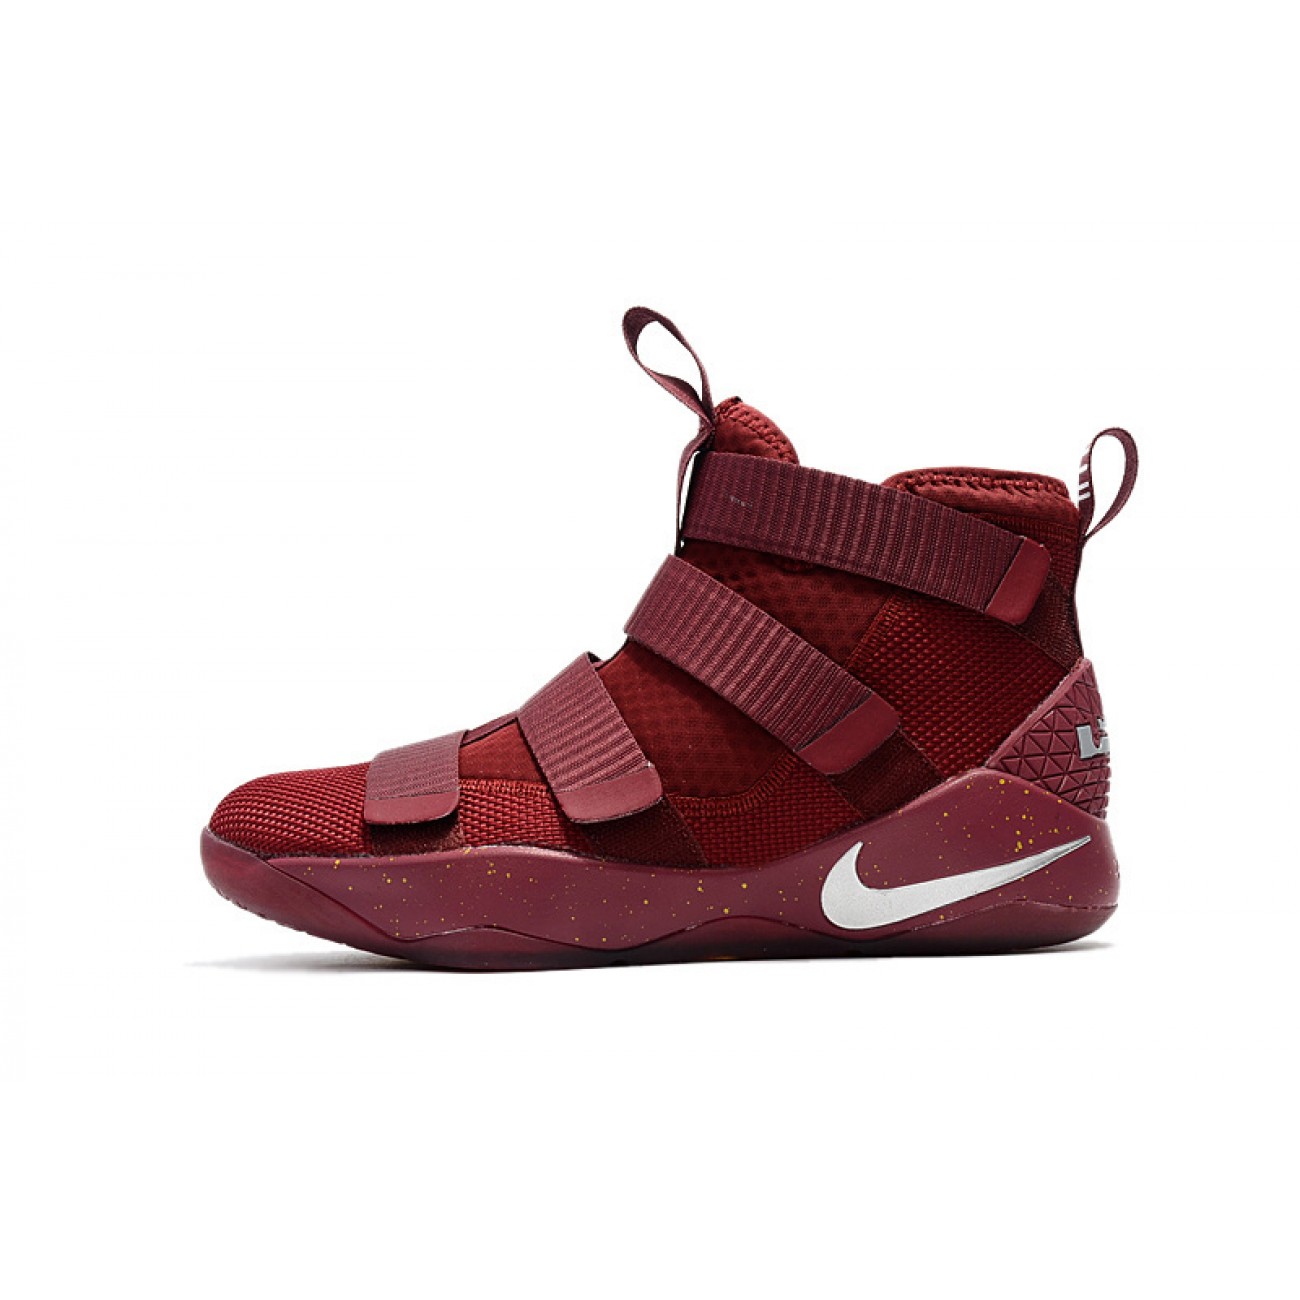 Lebron Soldier 11 "Wine Red"